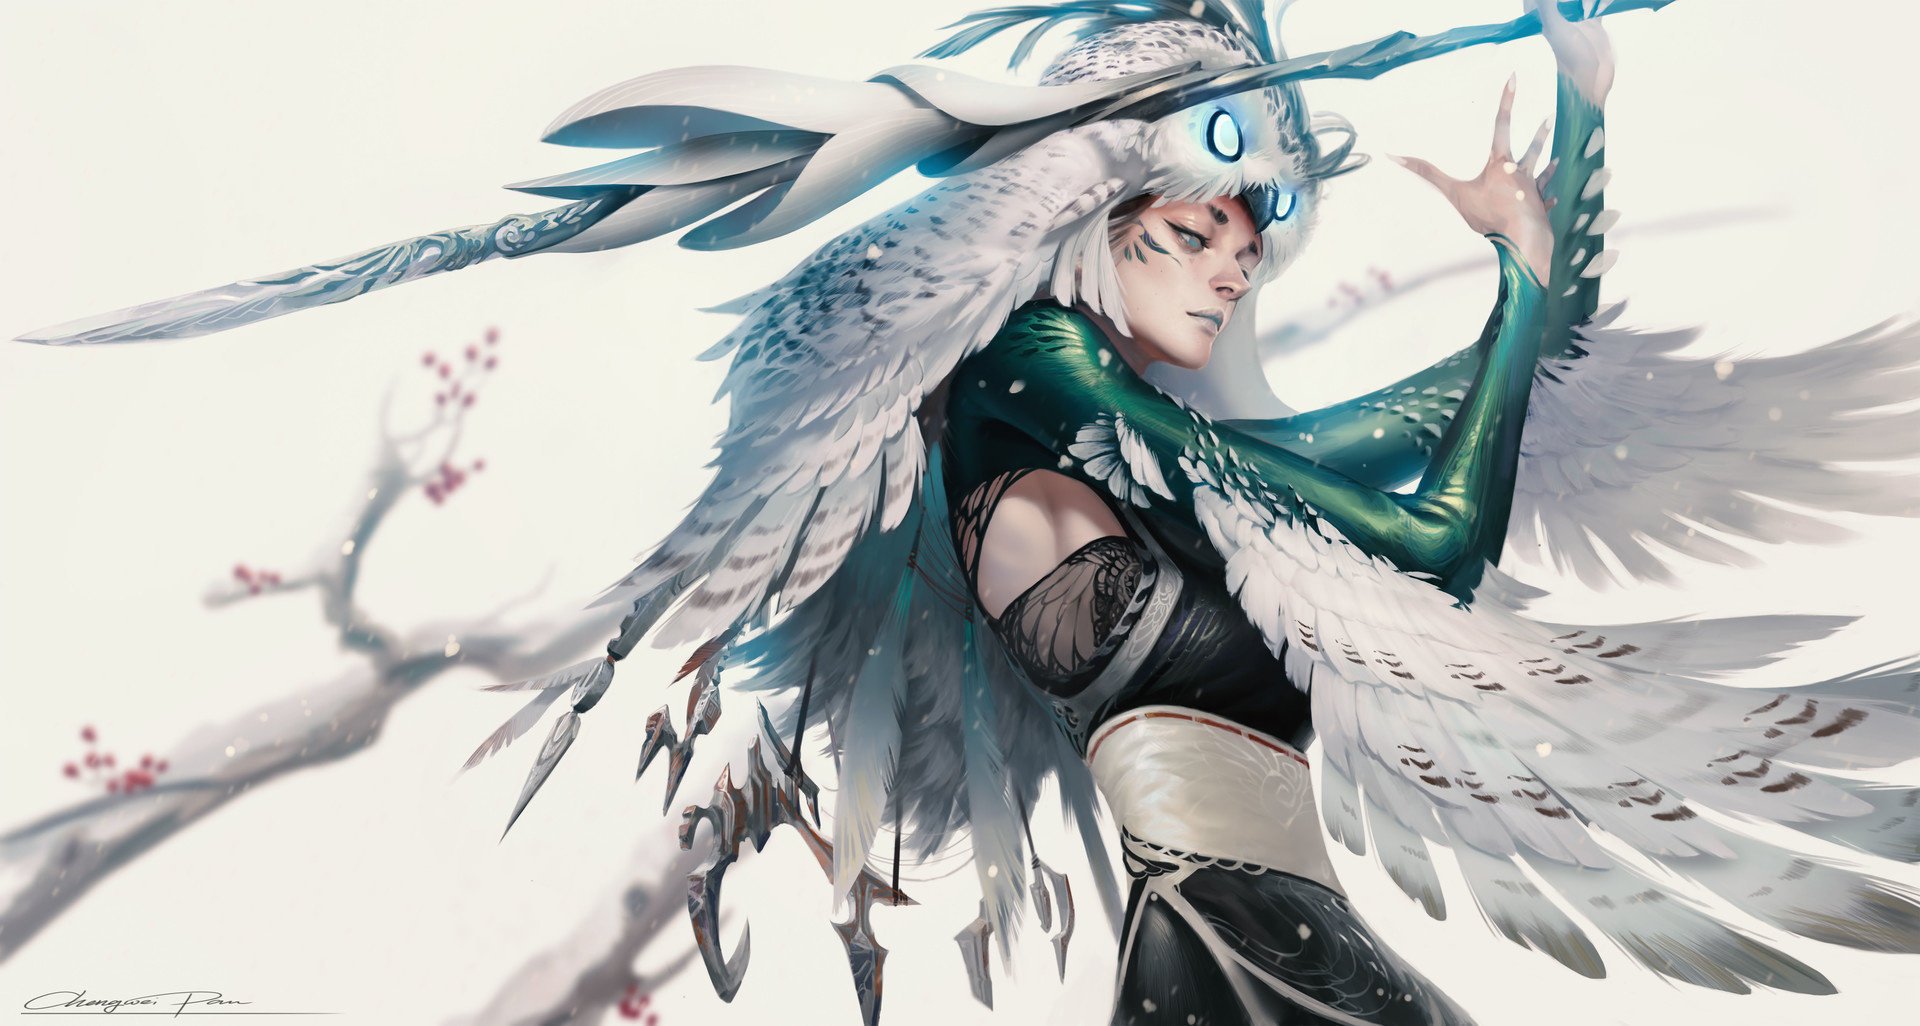 Owl Art Girl Fantasy Cosplay Eyes - Anime Feathers For Hair - HD Wallpaper 